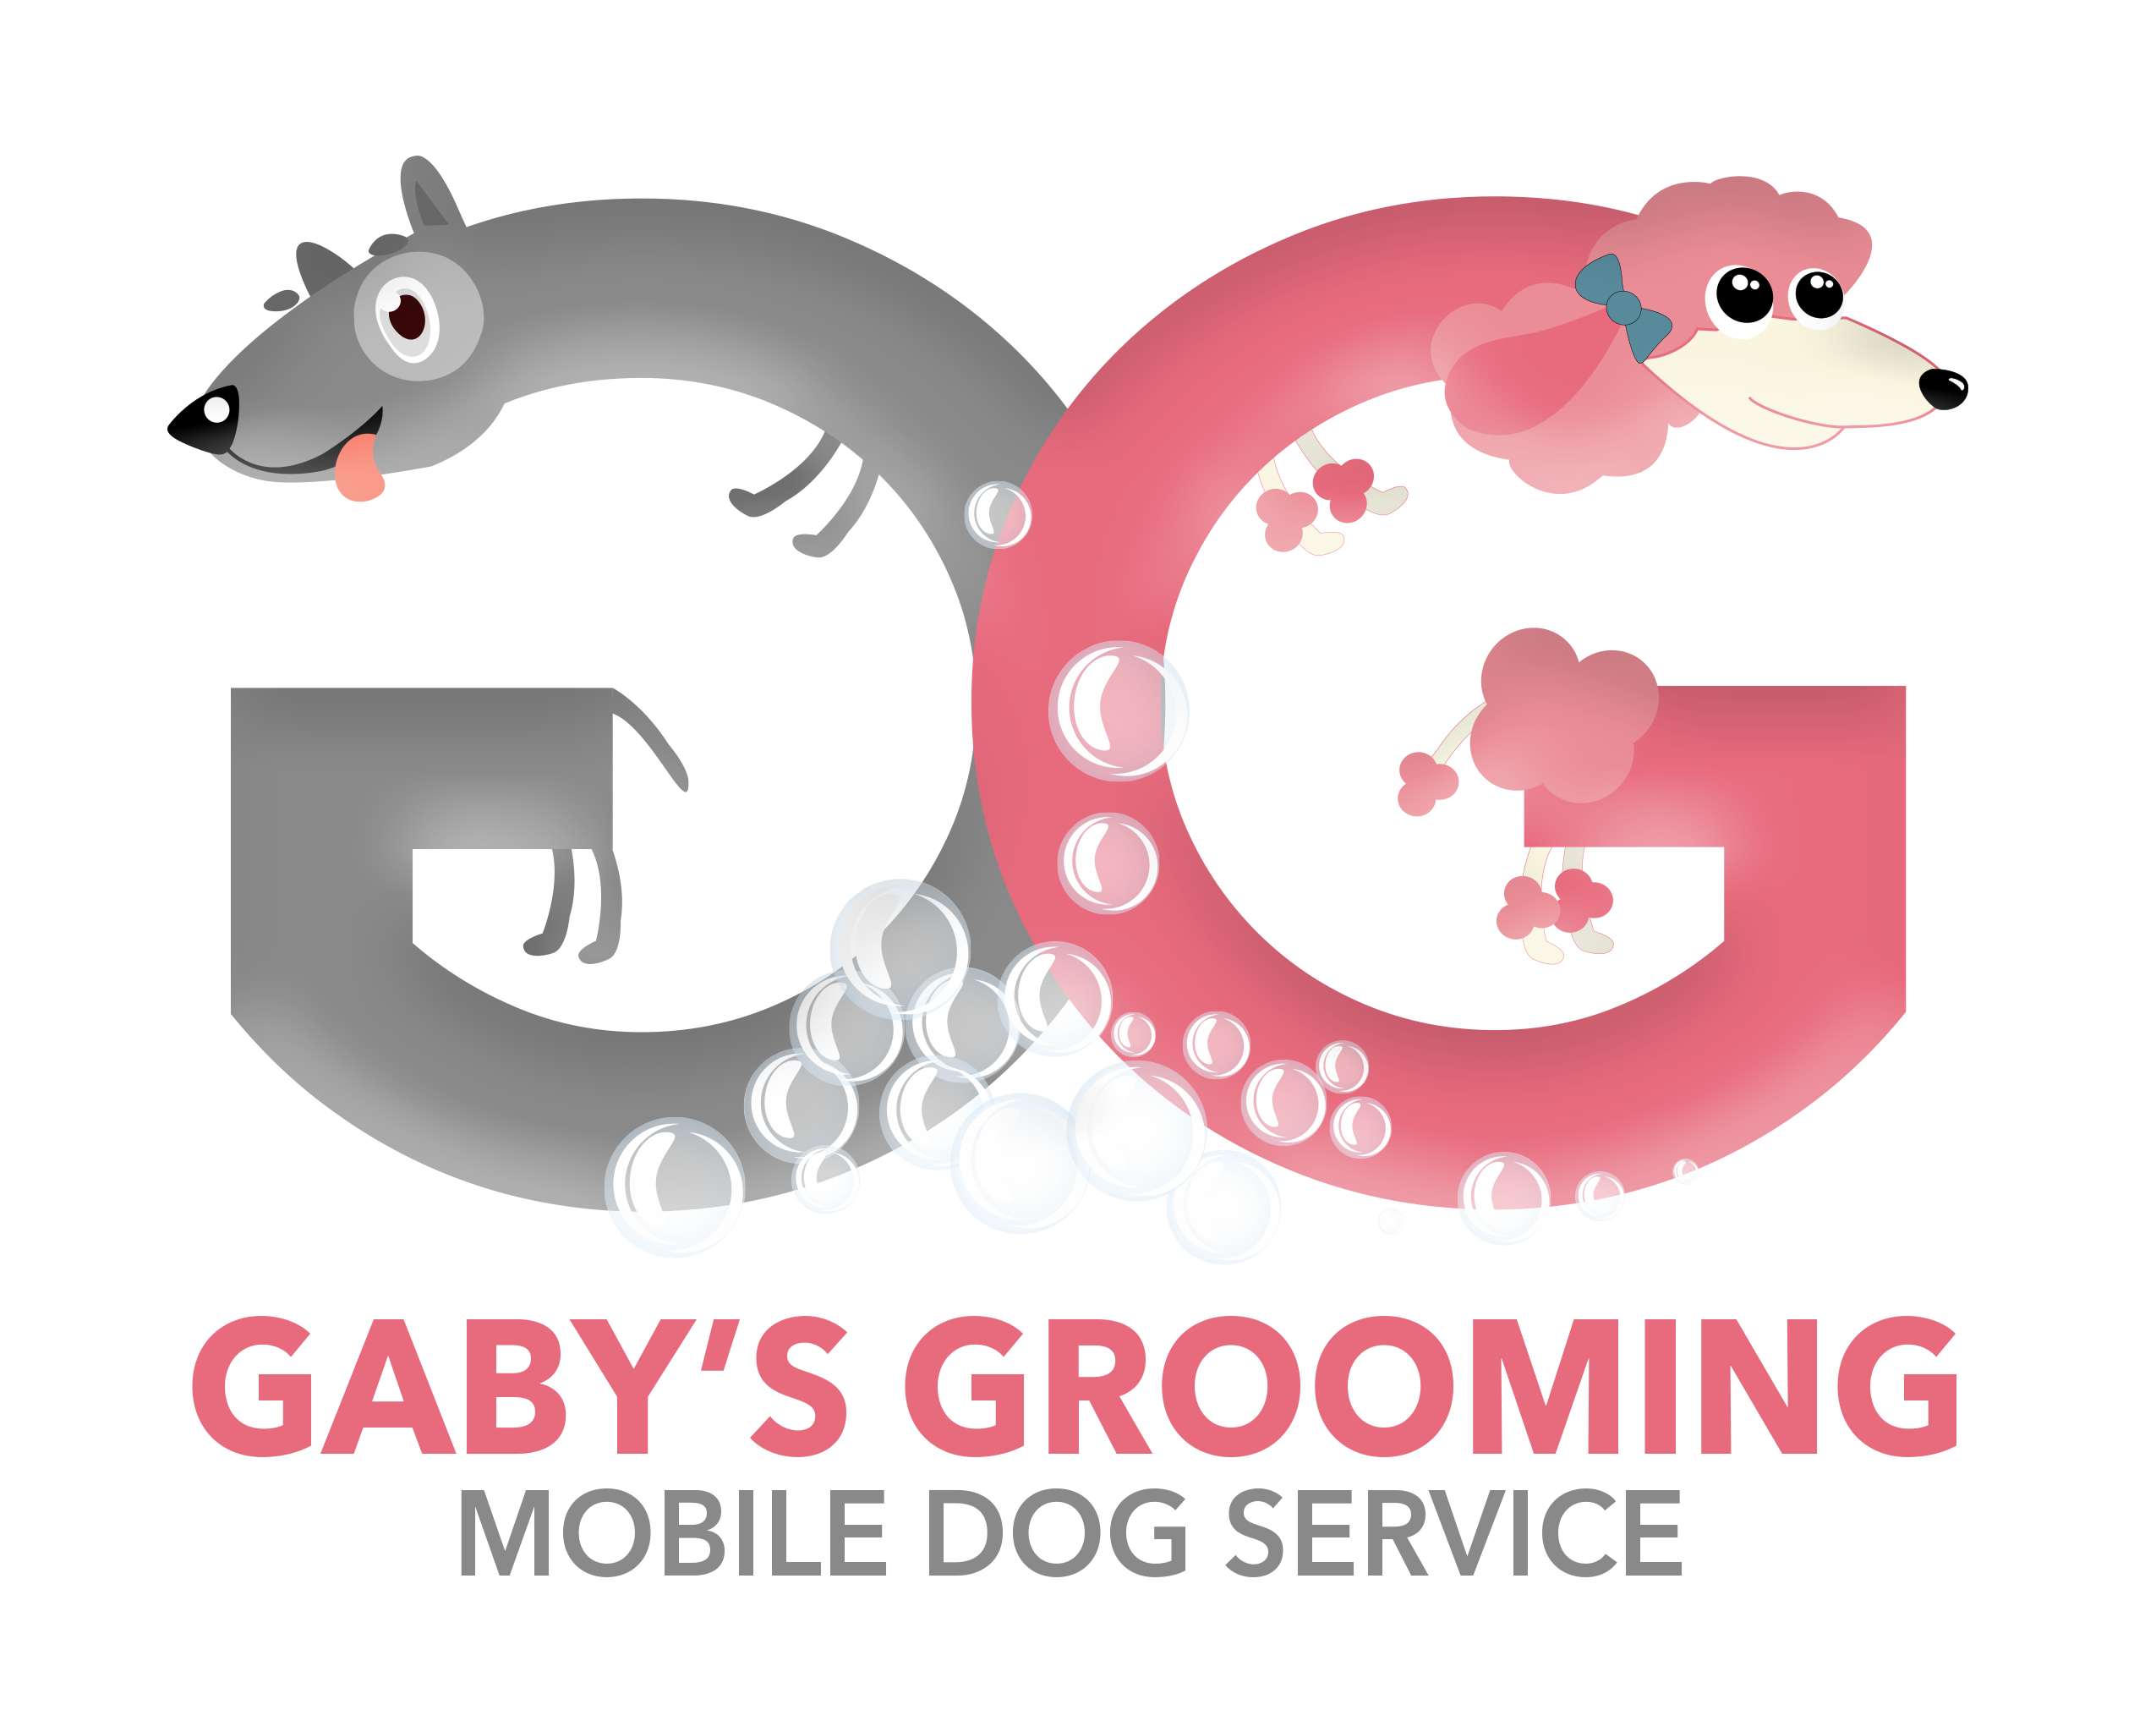 Gaby’s Grooming Mobile Dog Services